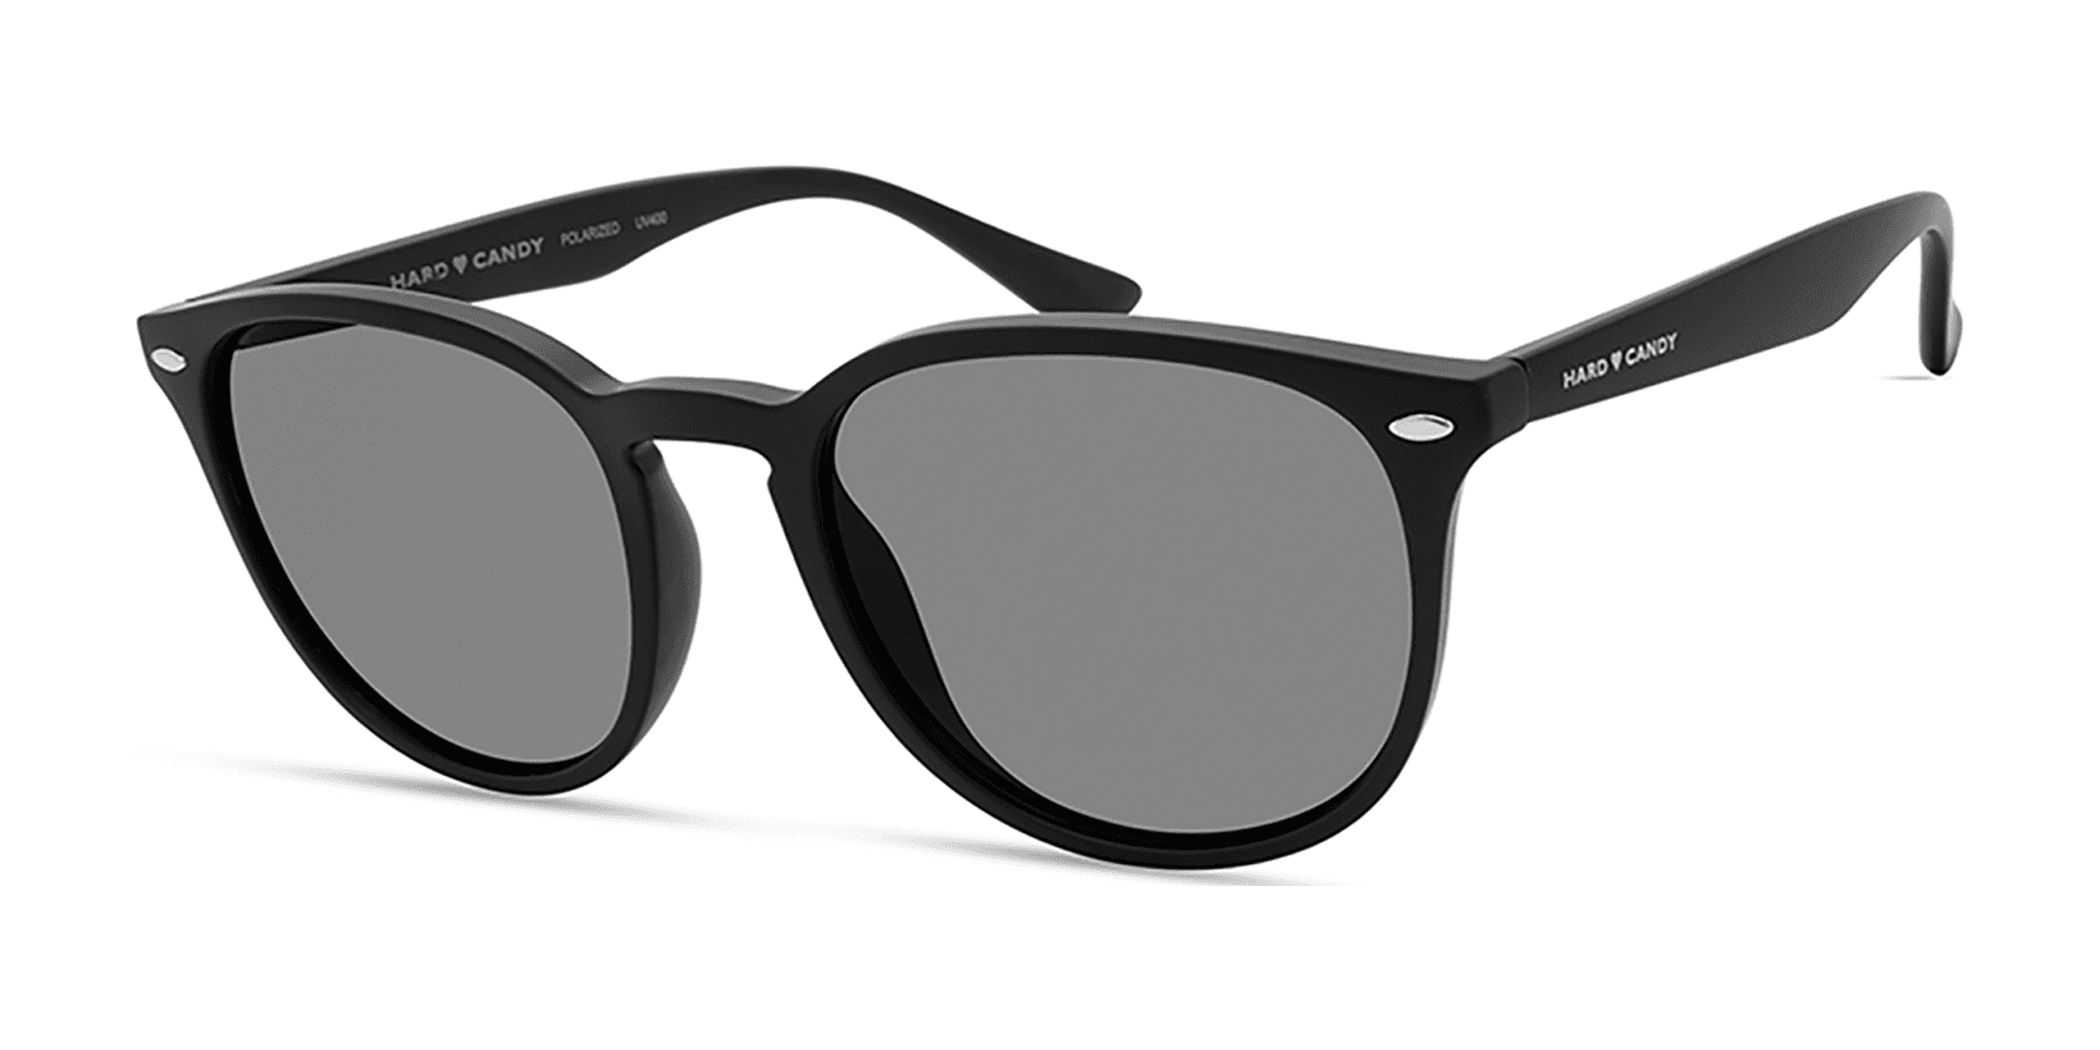 Hard Candy Womens Rx'able Sunglasses, Hs20, Matte Black, 52-20-145, with Case - image 1 of 20